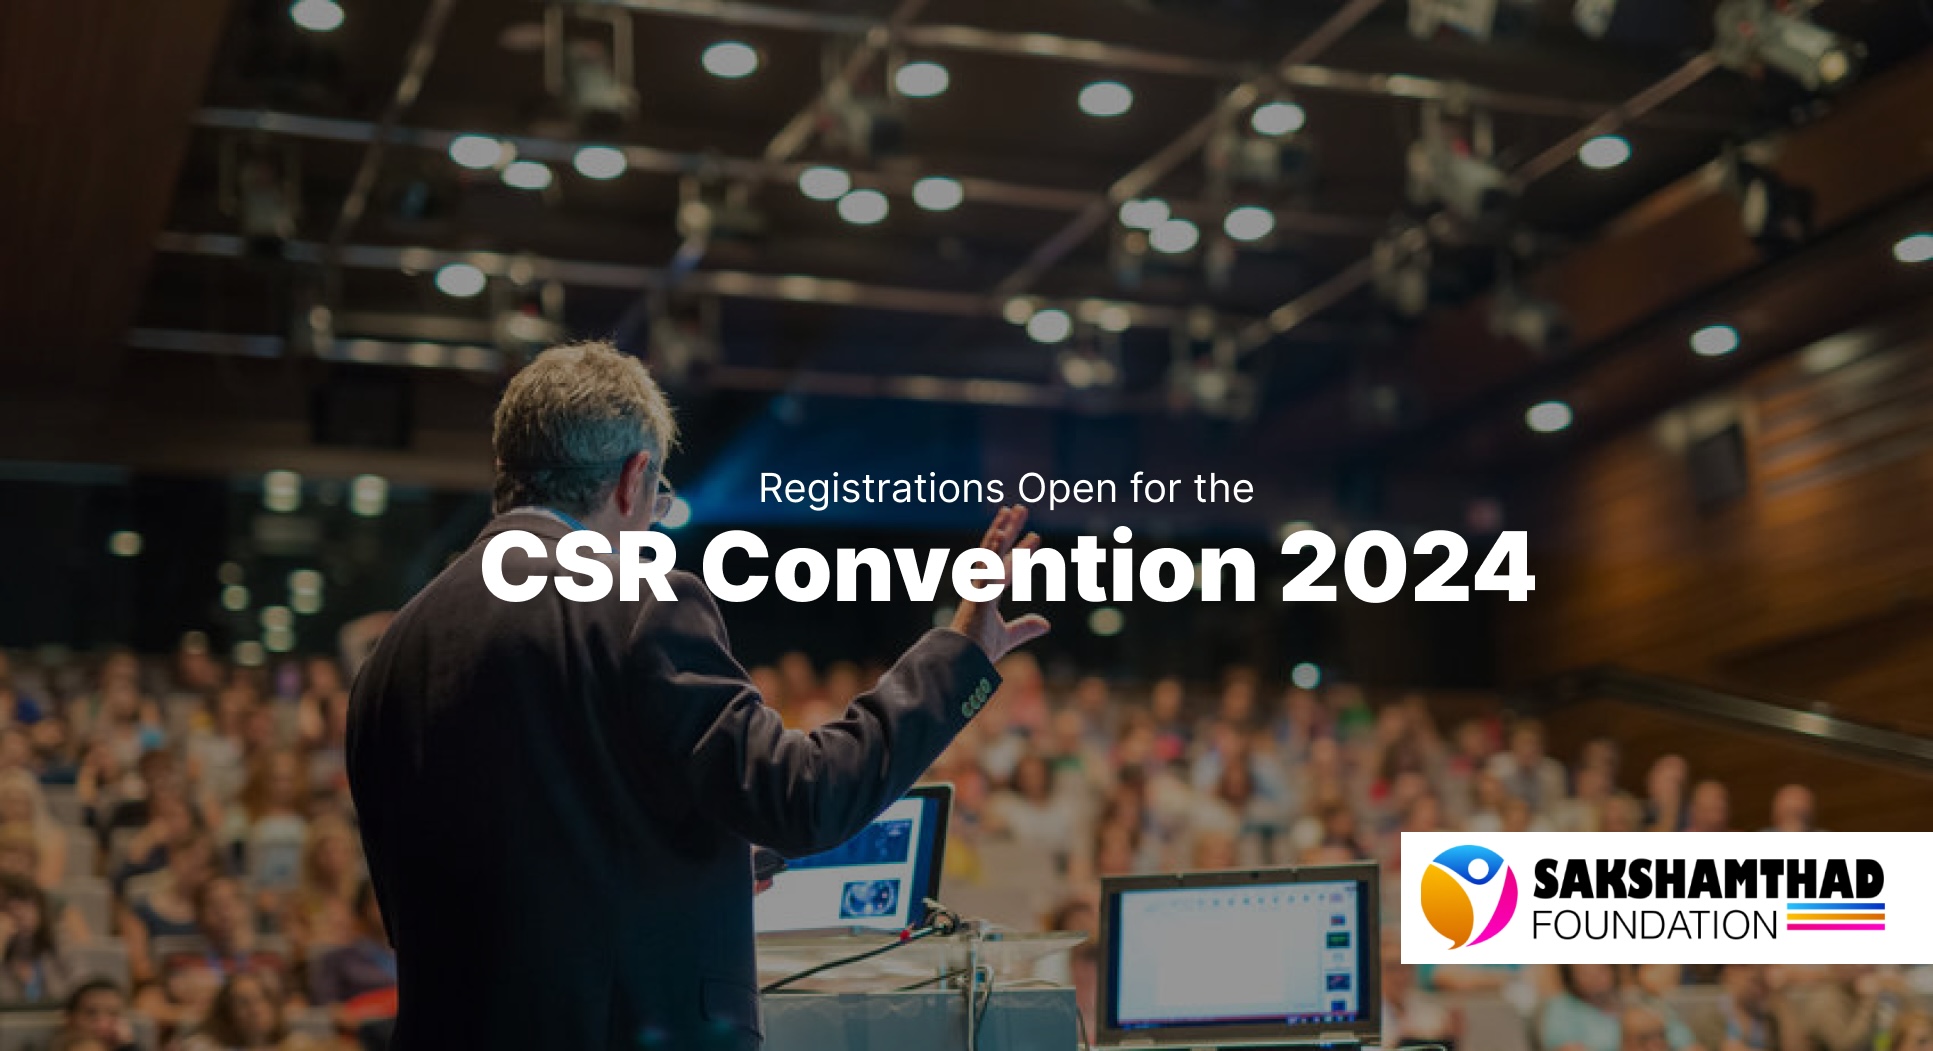 Registration for Participation in the CSR Convention